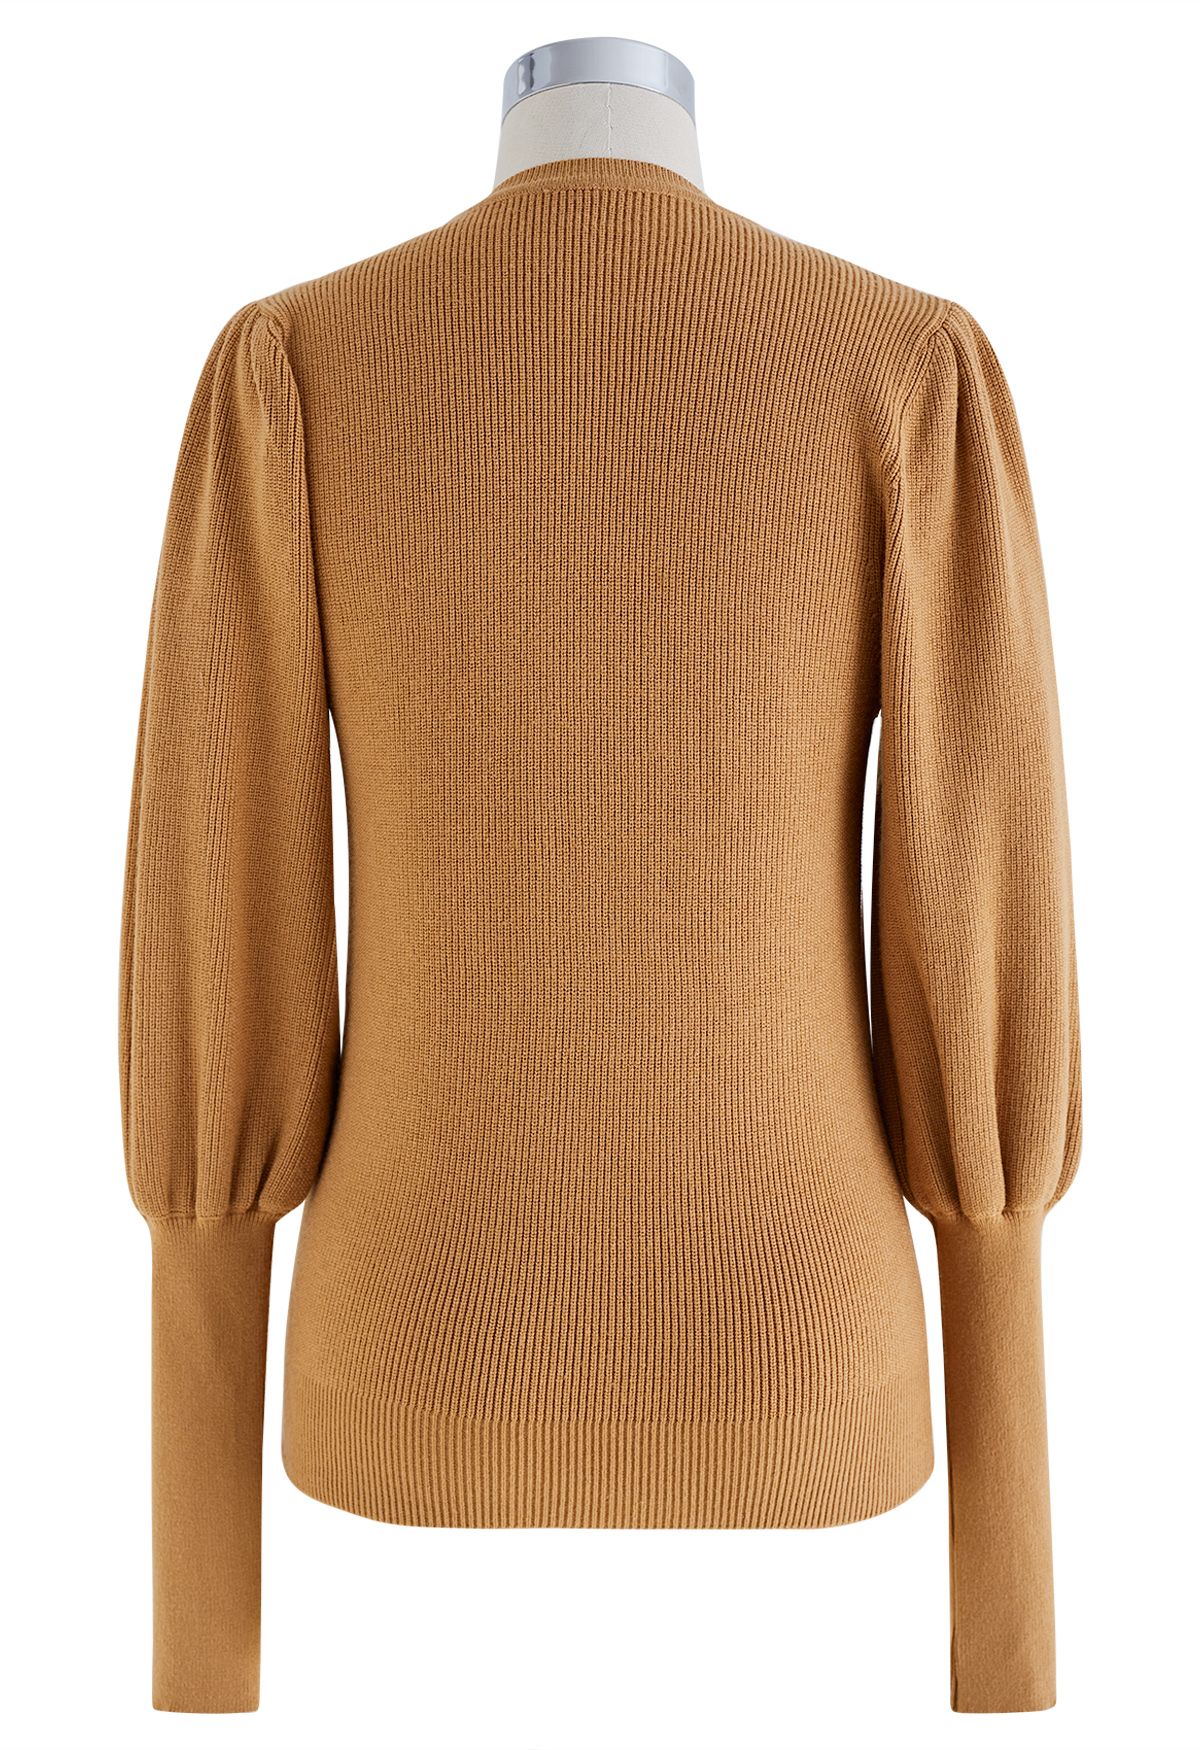 Bubble Sleeves Button Trimmed Knit Top in Tan